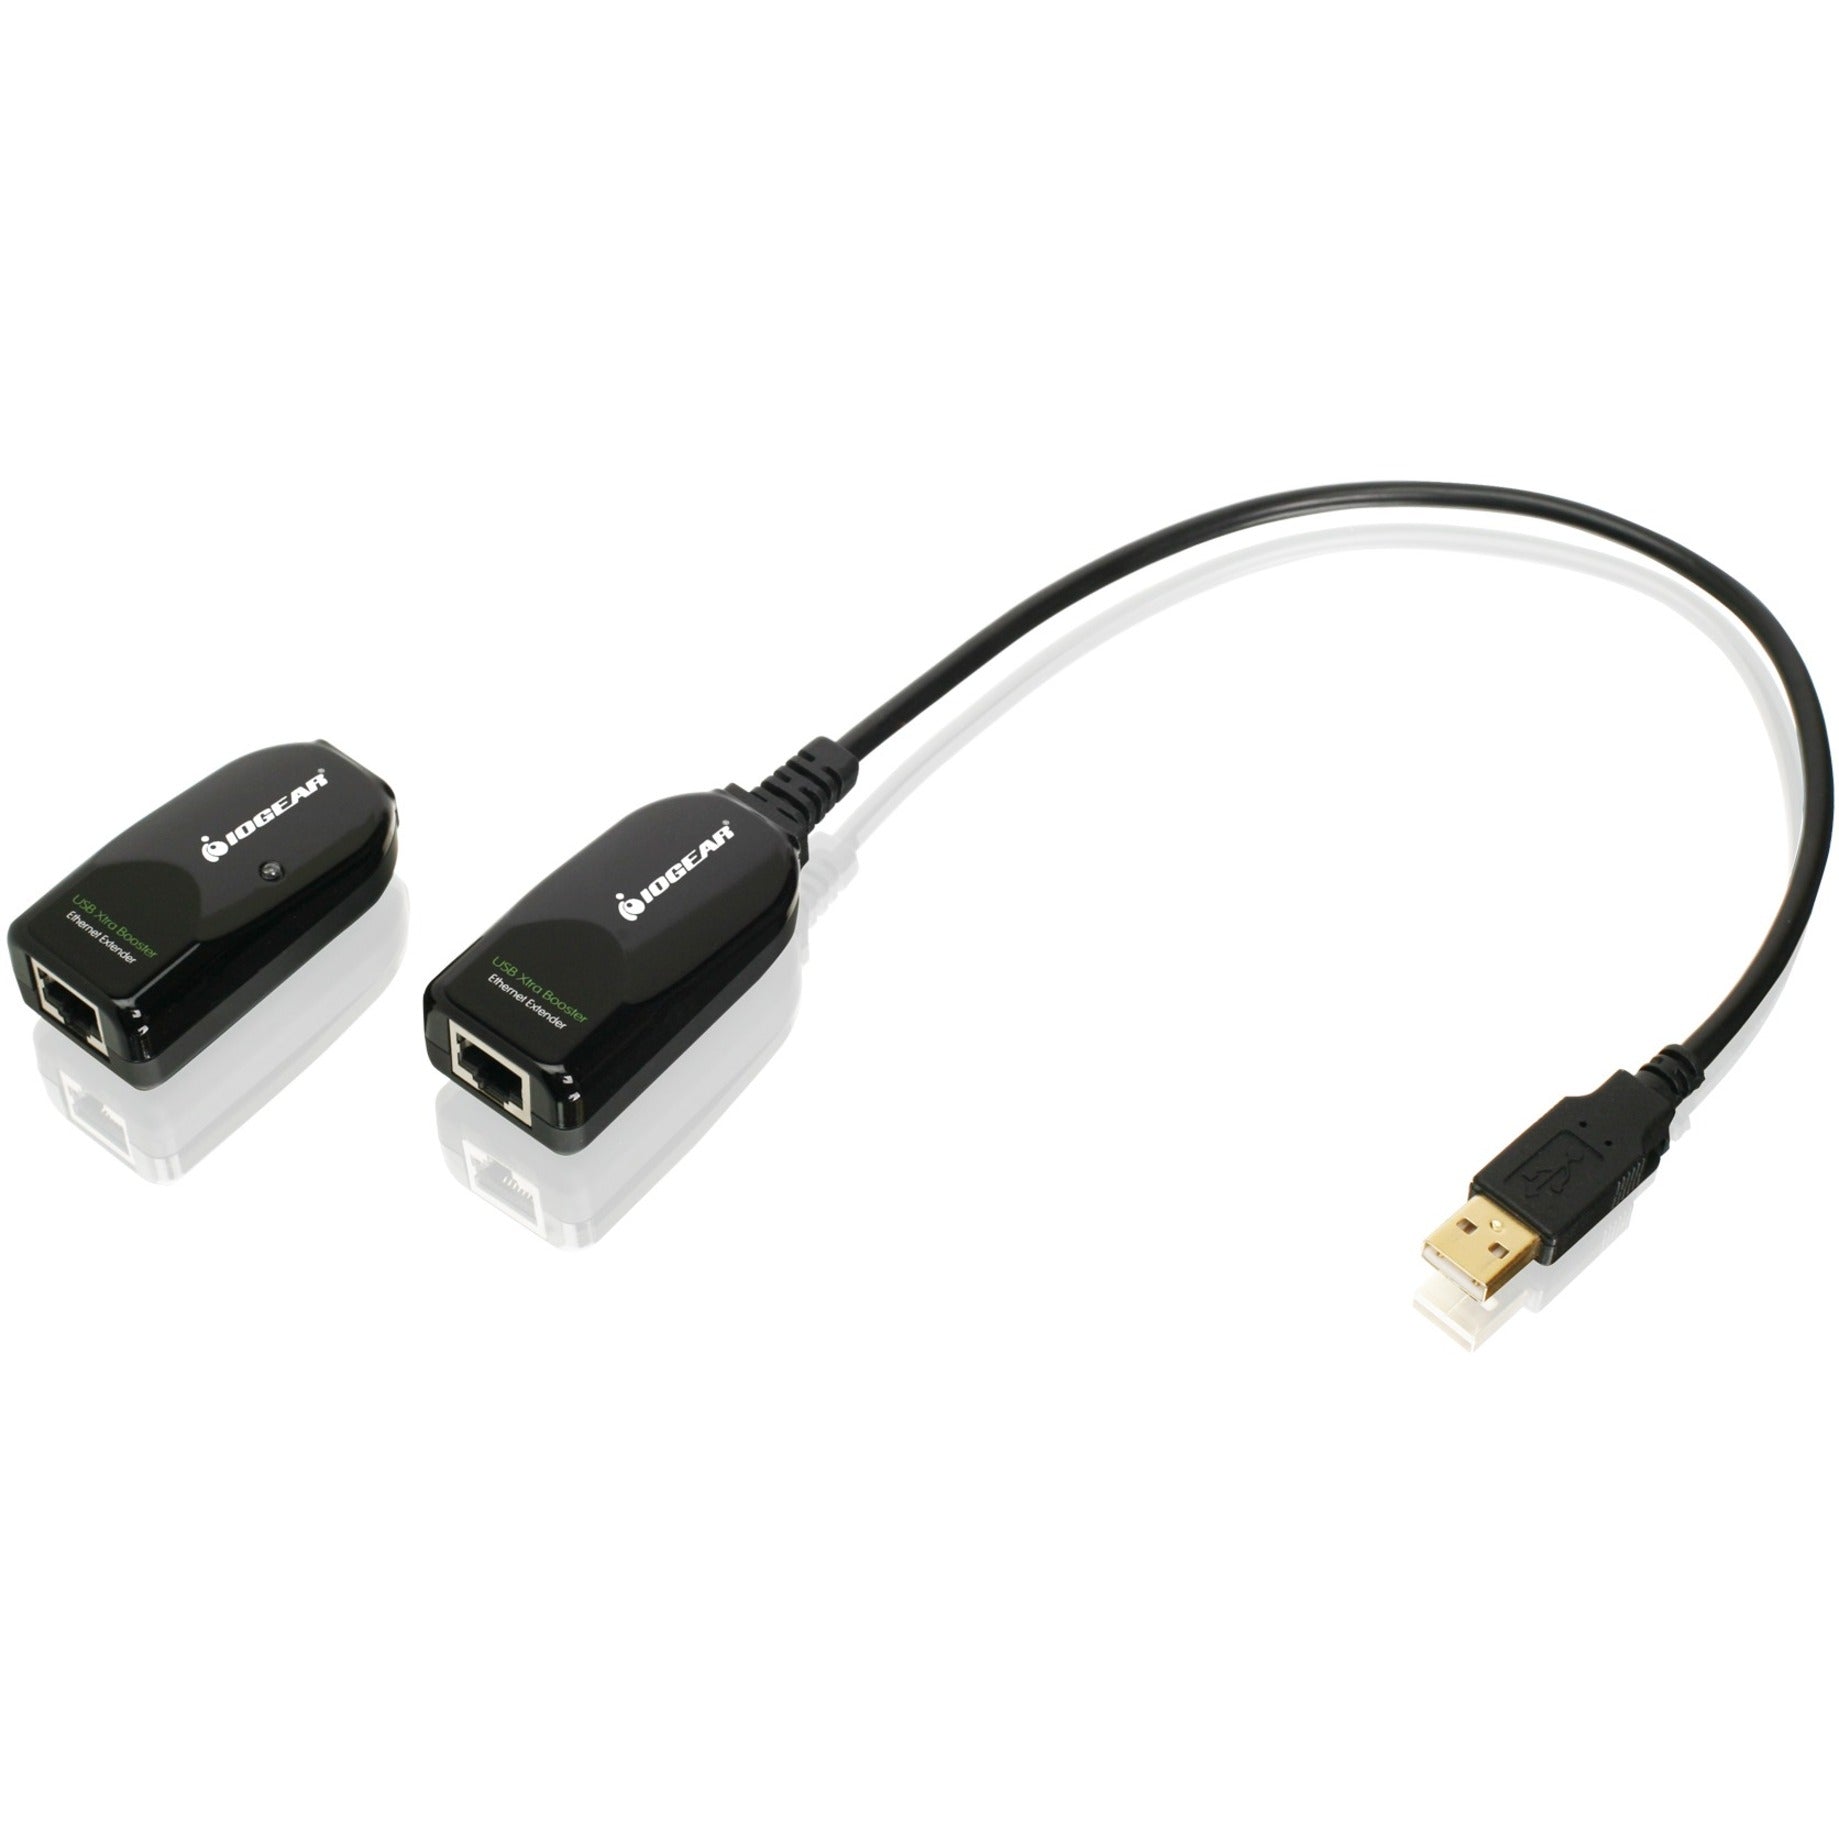 IOGEAR GUCE62 USB 2.0 BoostLinq Ethernet - 164ft, Reliable USB Extender for Long Distance Connections